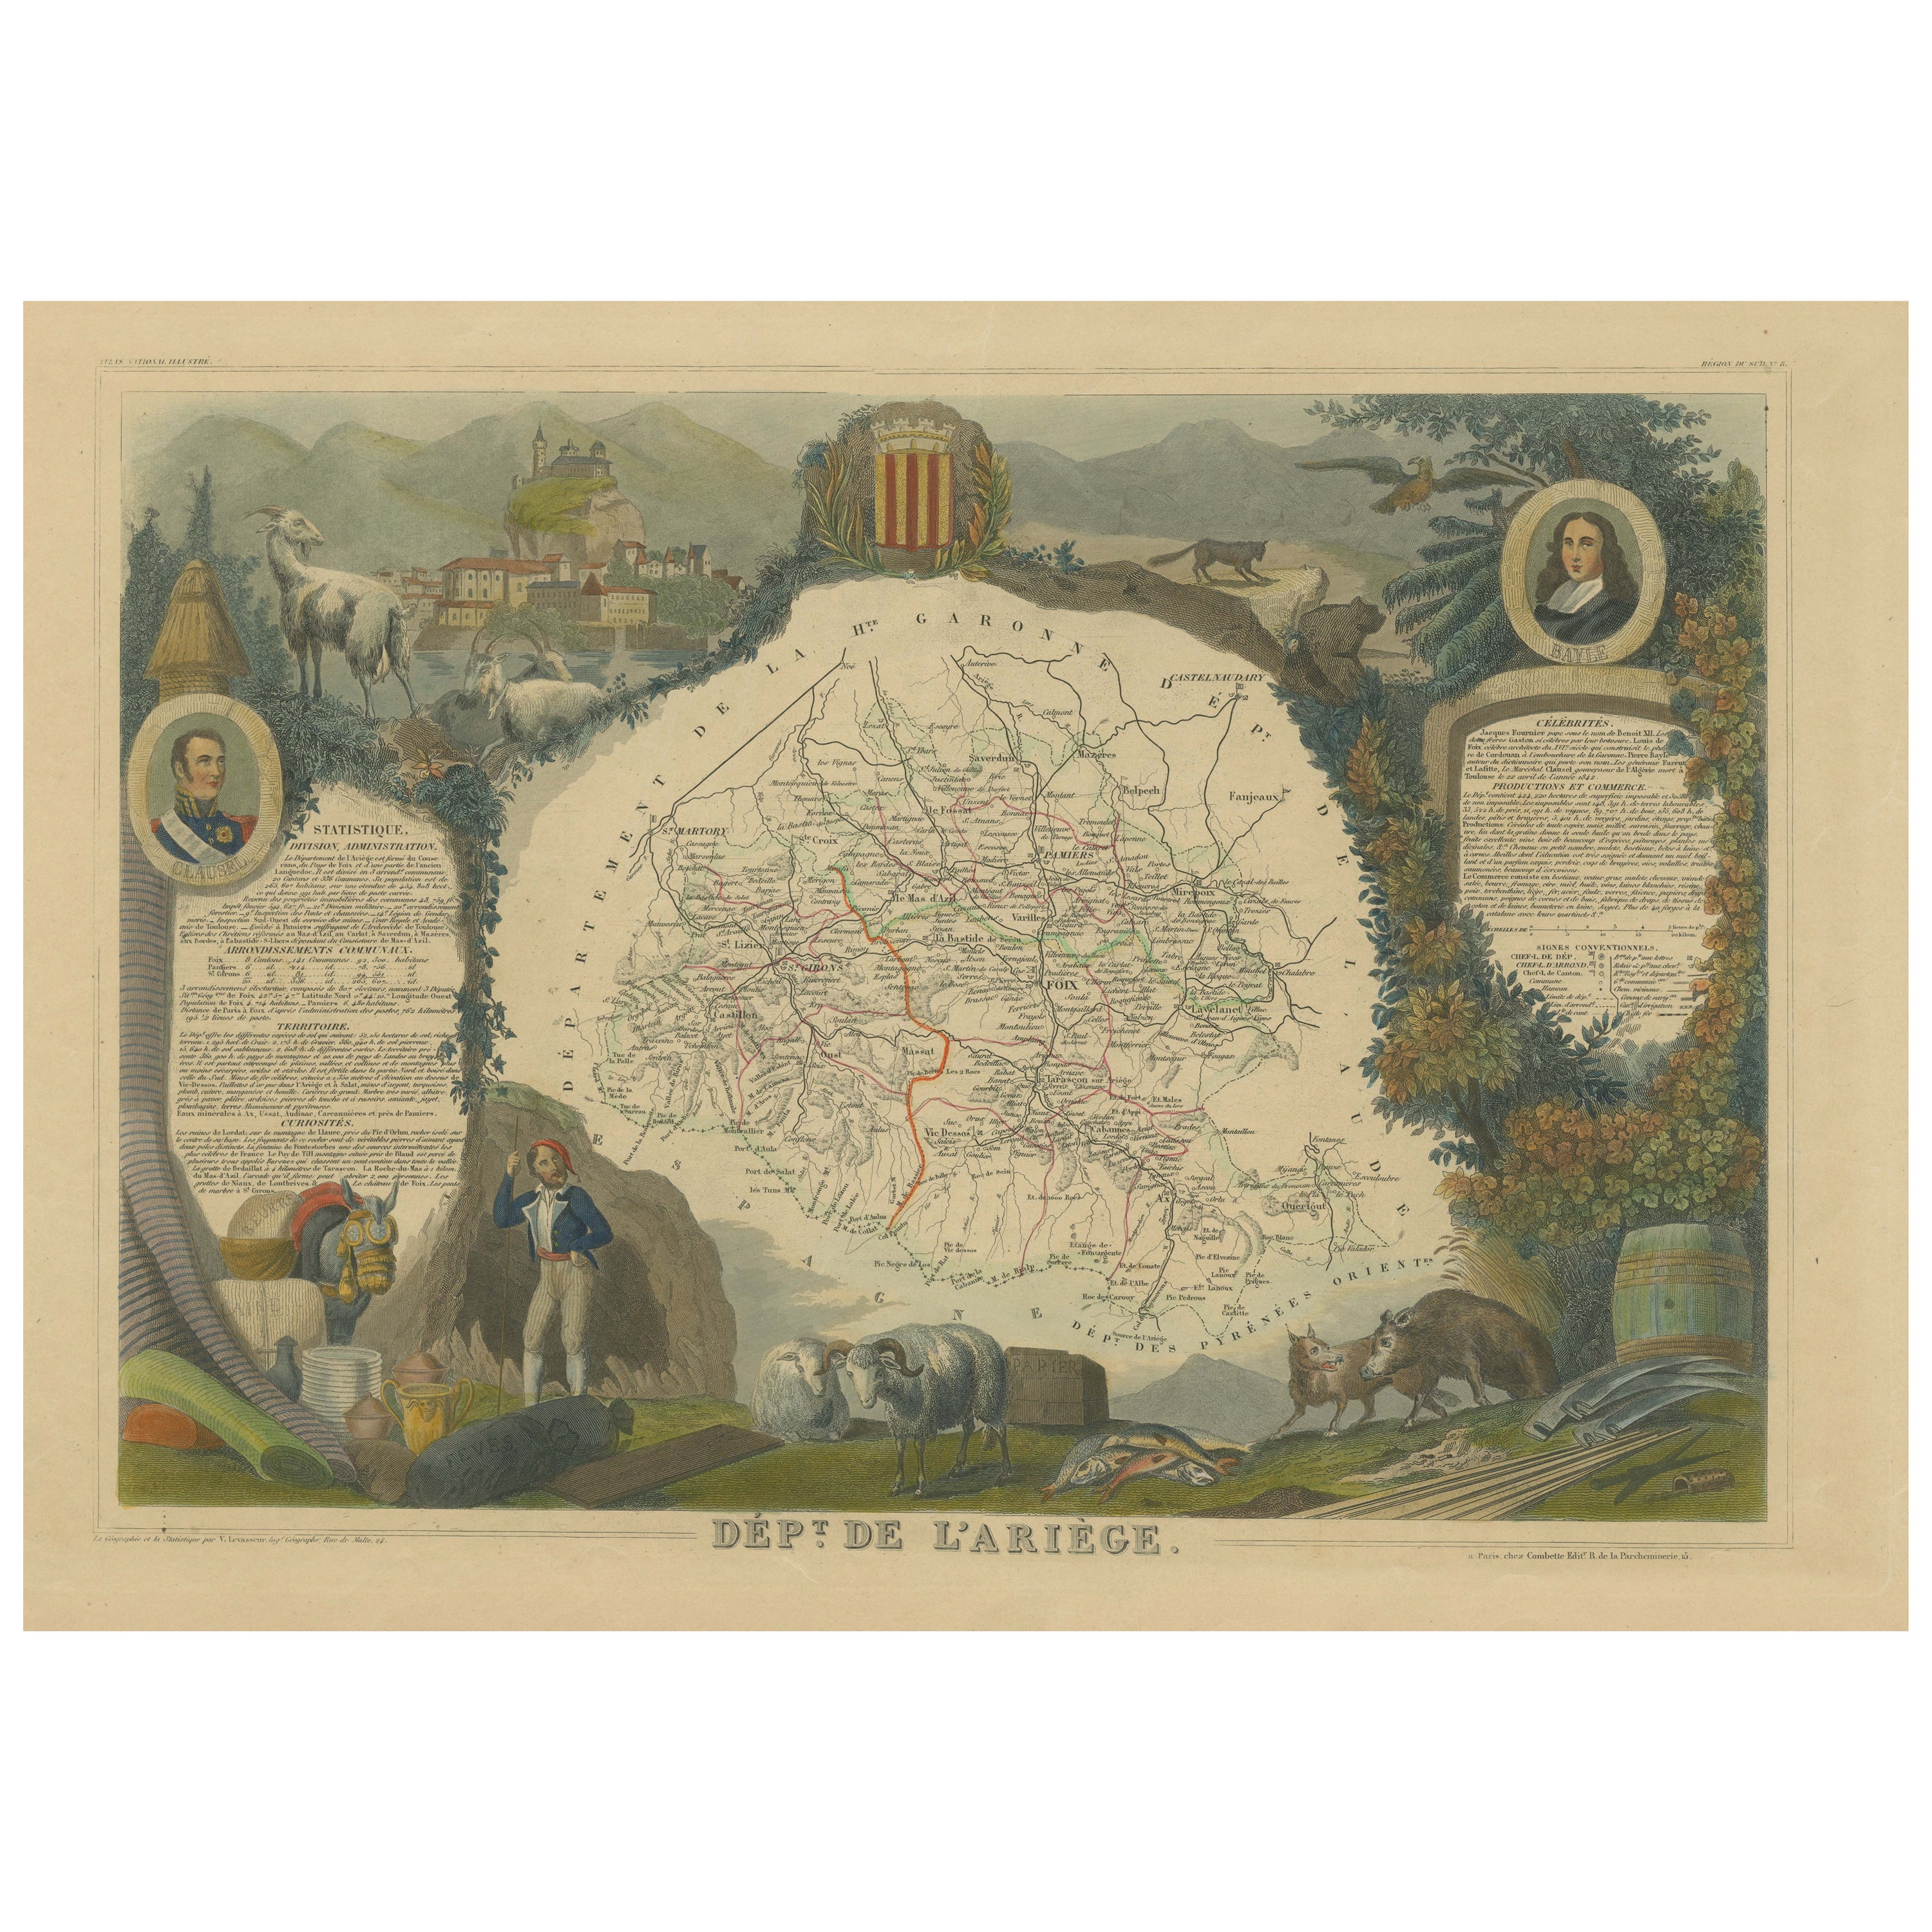 Hand Colored Antique Map of the Department of Ariège, France